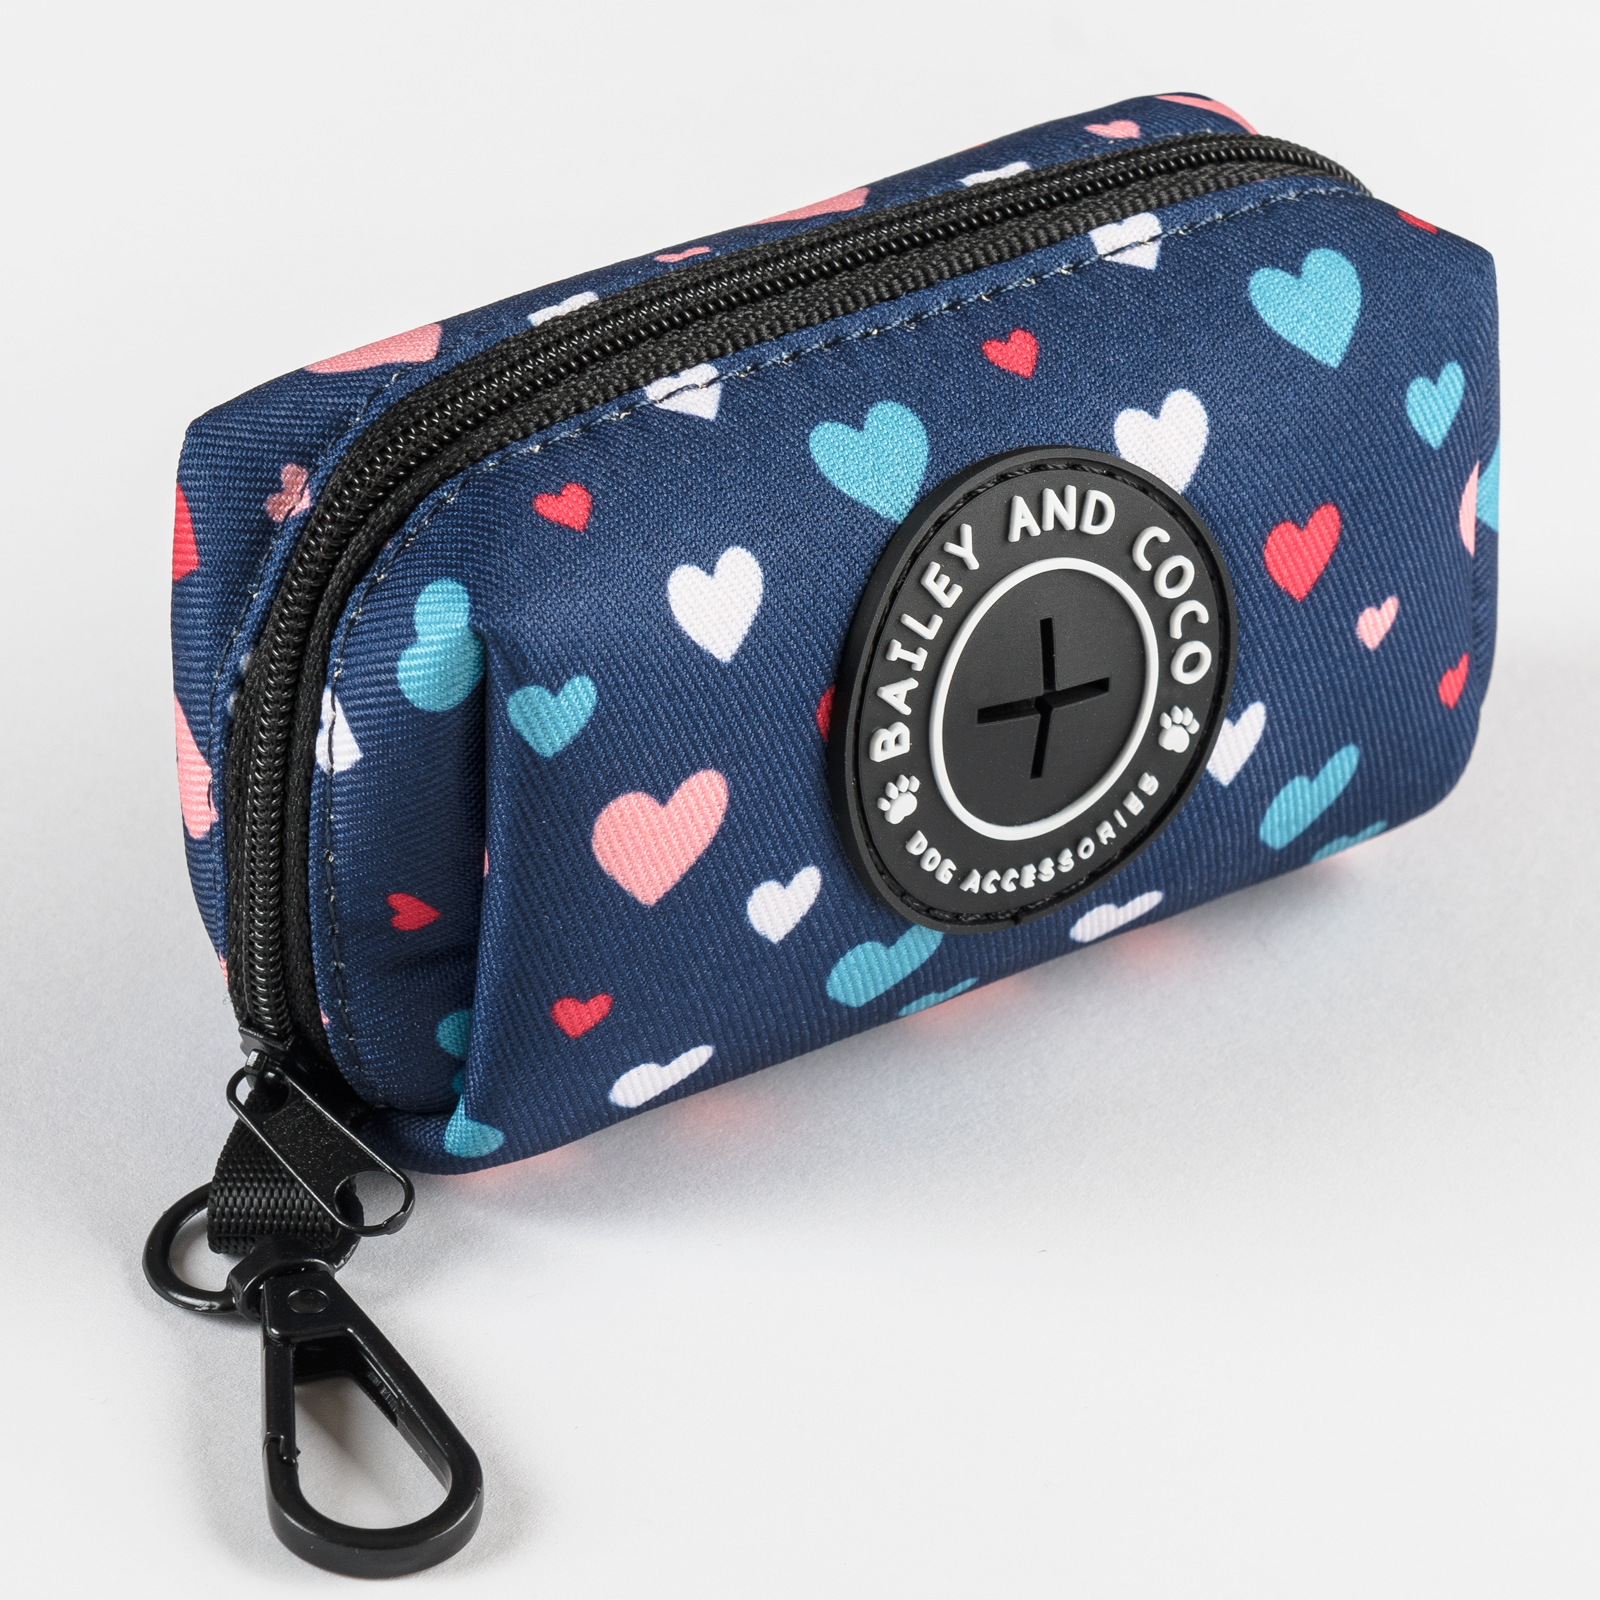 Poo Bag Holder - All You Need Is Love.